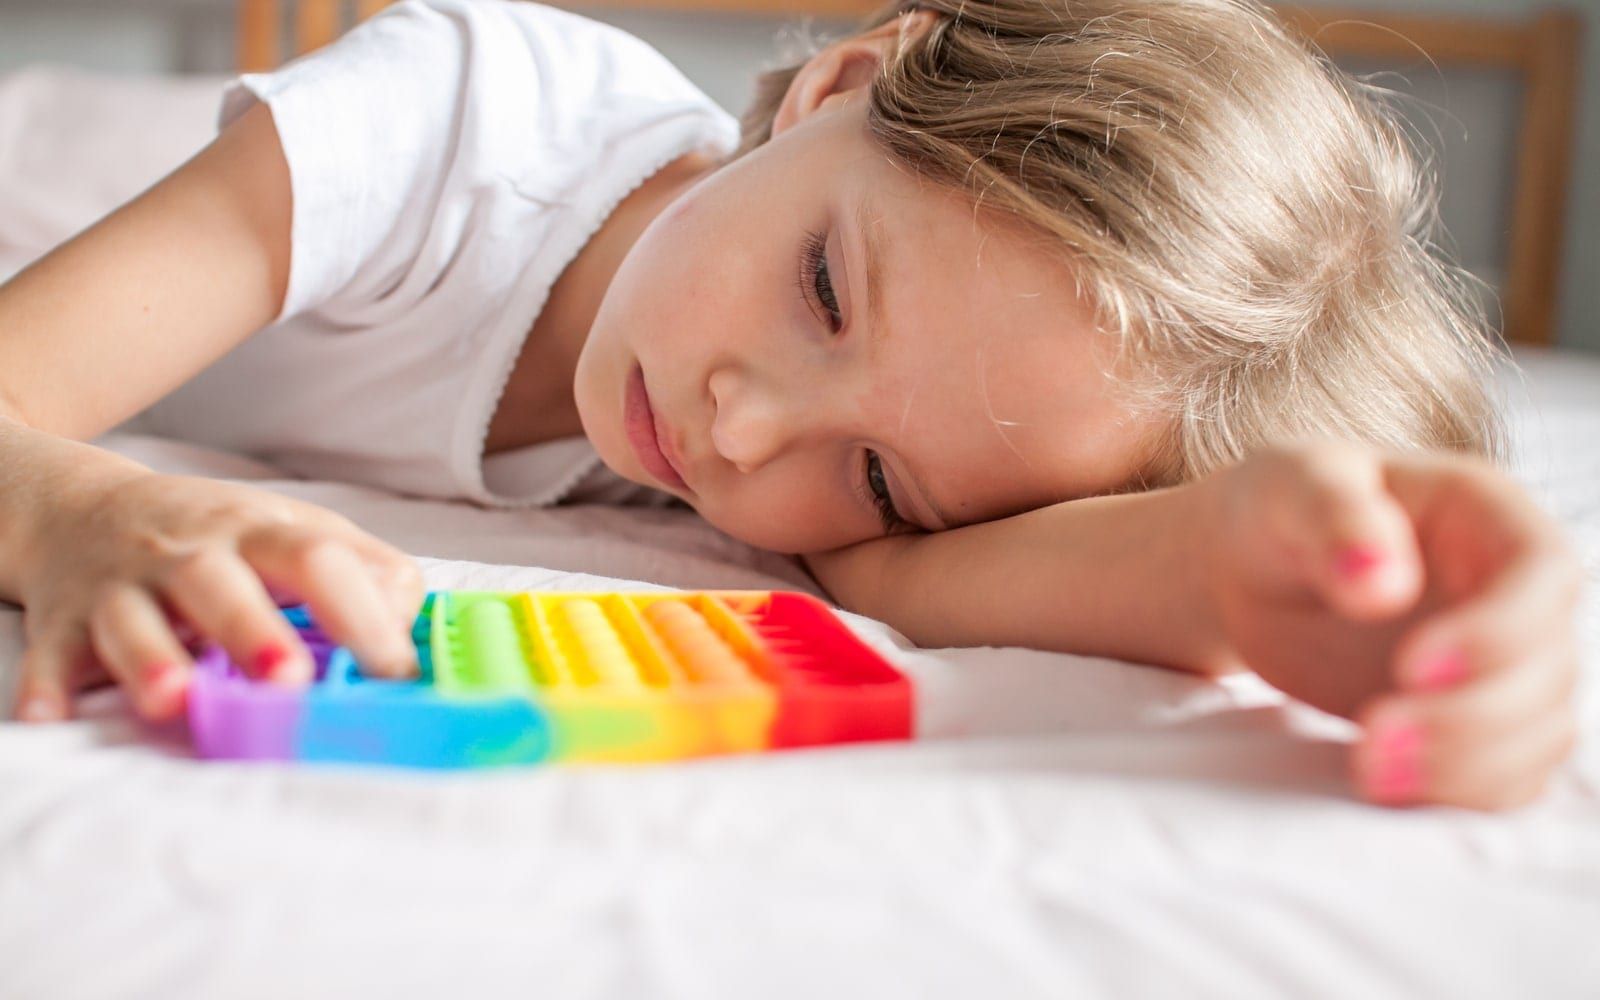 Child playing with anxiety soothing toy